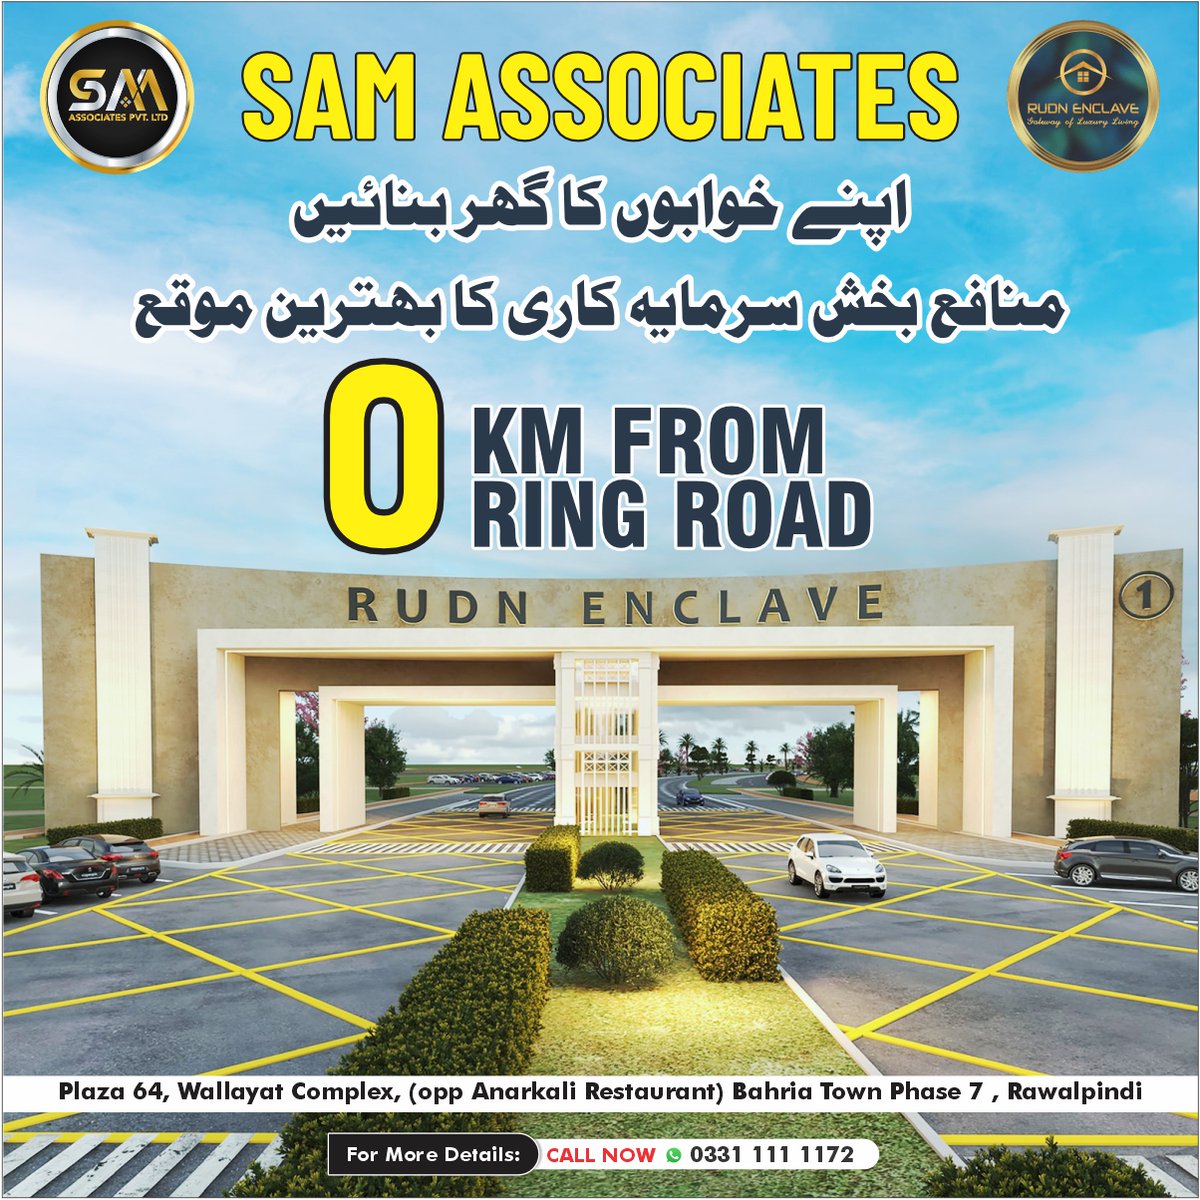 We deals in RUDN ENCLAVE, A Modern And affordable Housing Society located At Rawalpindi Islamabad.
For More Details: Please Contact Us: UAN 0331 111 1172
#samassociate #societies #samassociatepvtltd #realestateinvestor #RudnEnclave #realestatelife #RealEstatePakistan